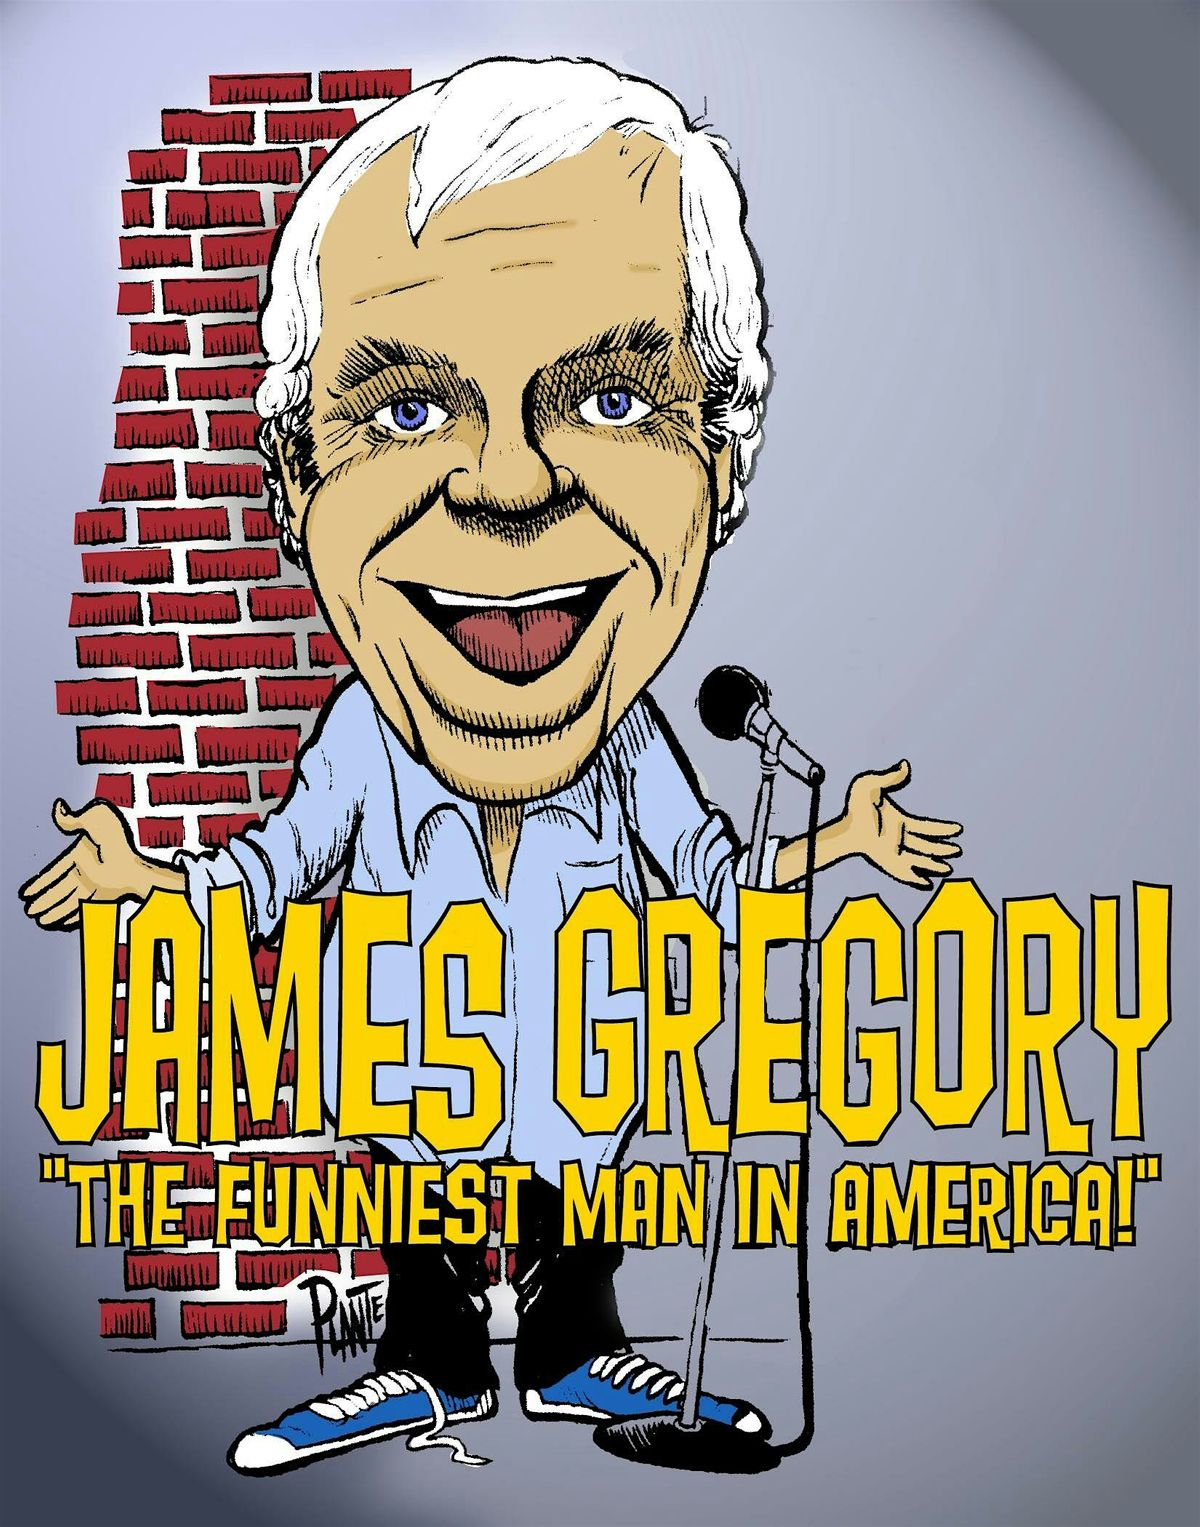 James Gregory "The Funniest Man In America"